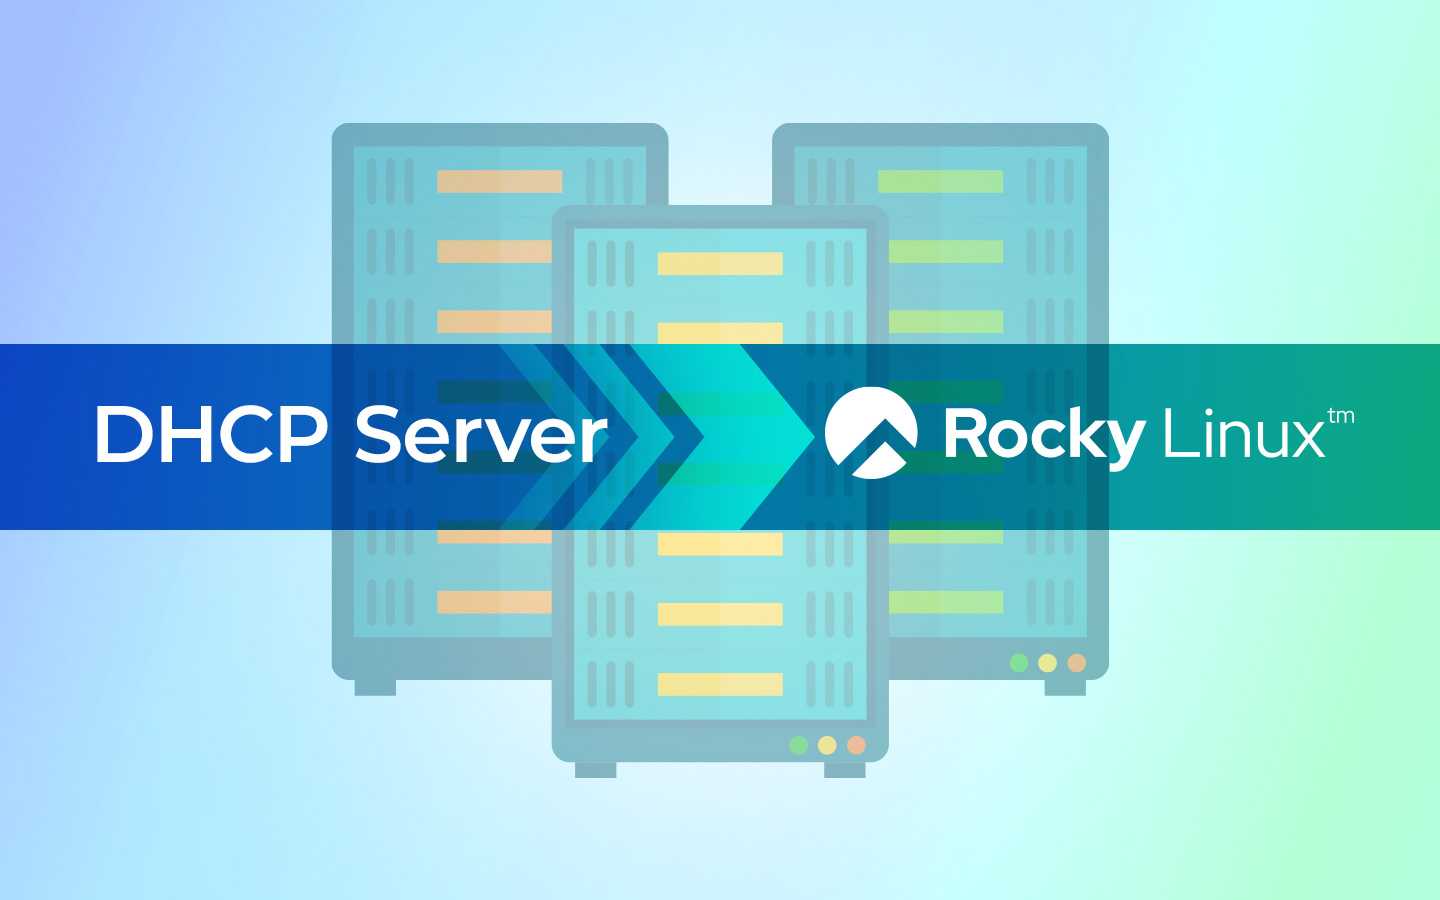 How to Install and Configure a DHCP Server on Rocky Linux